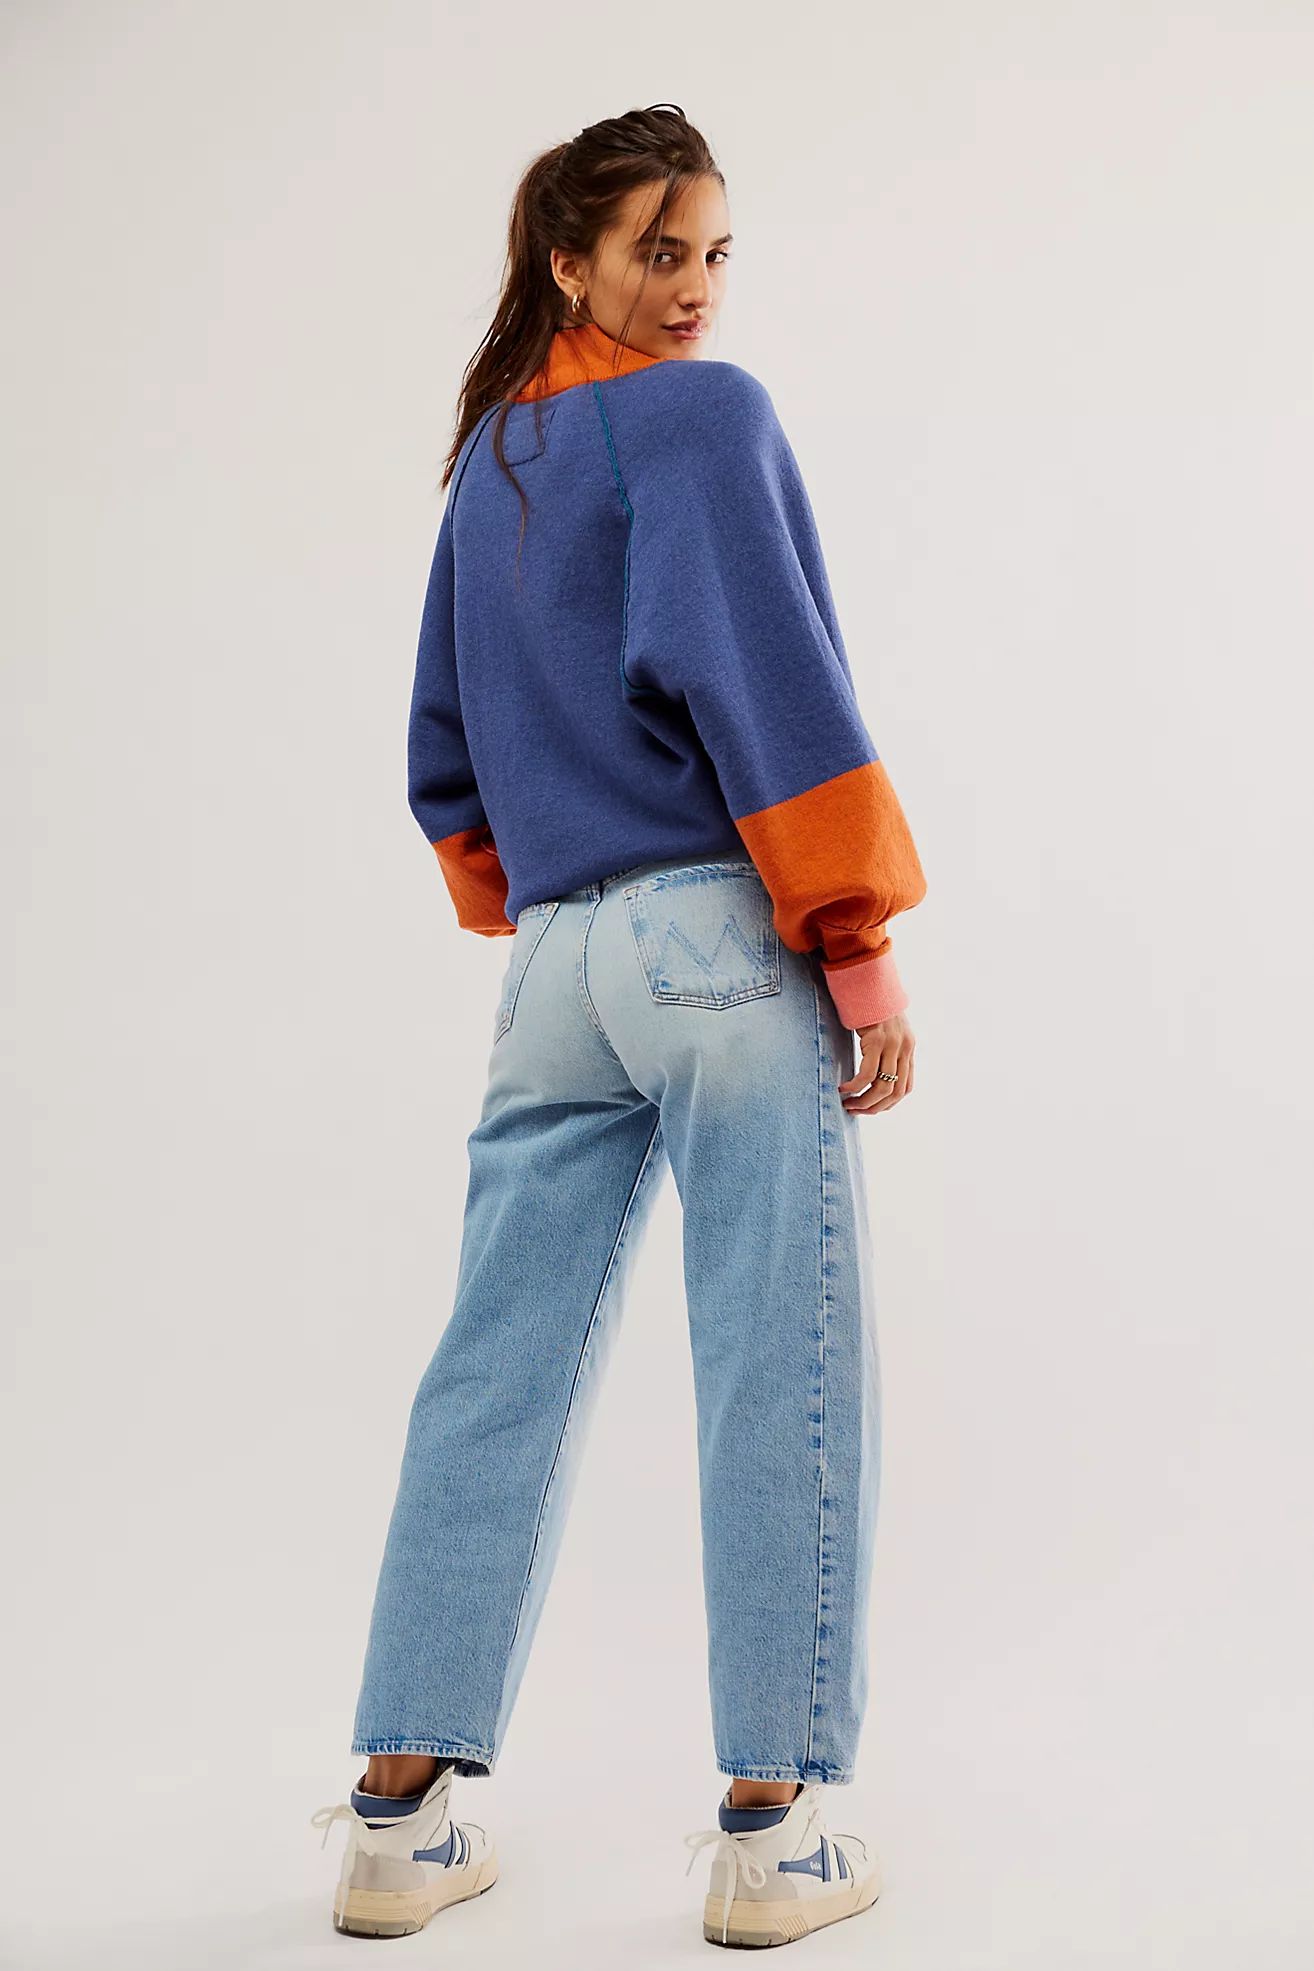 Similar Items

               
            Levi's 90's 501 Jeans
            
                Qui... | Free People (Global - UK&FR Excluded)